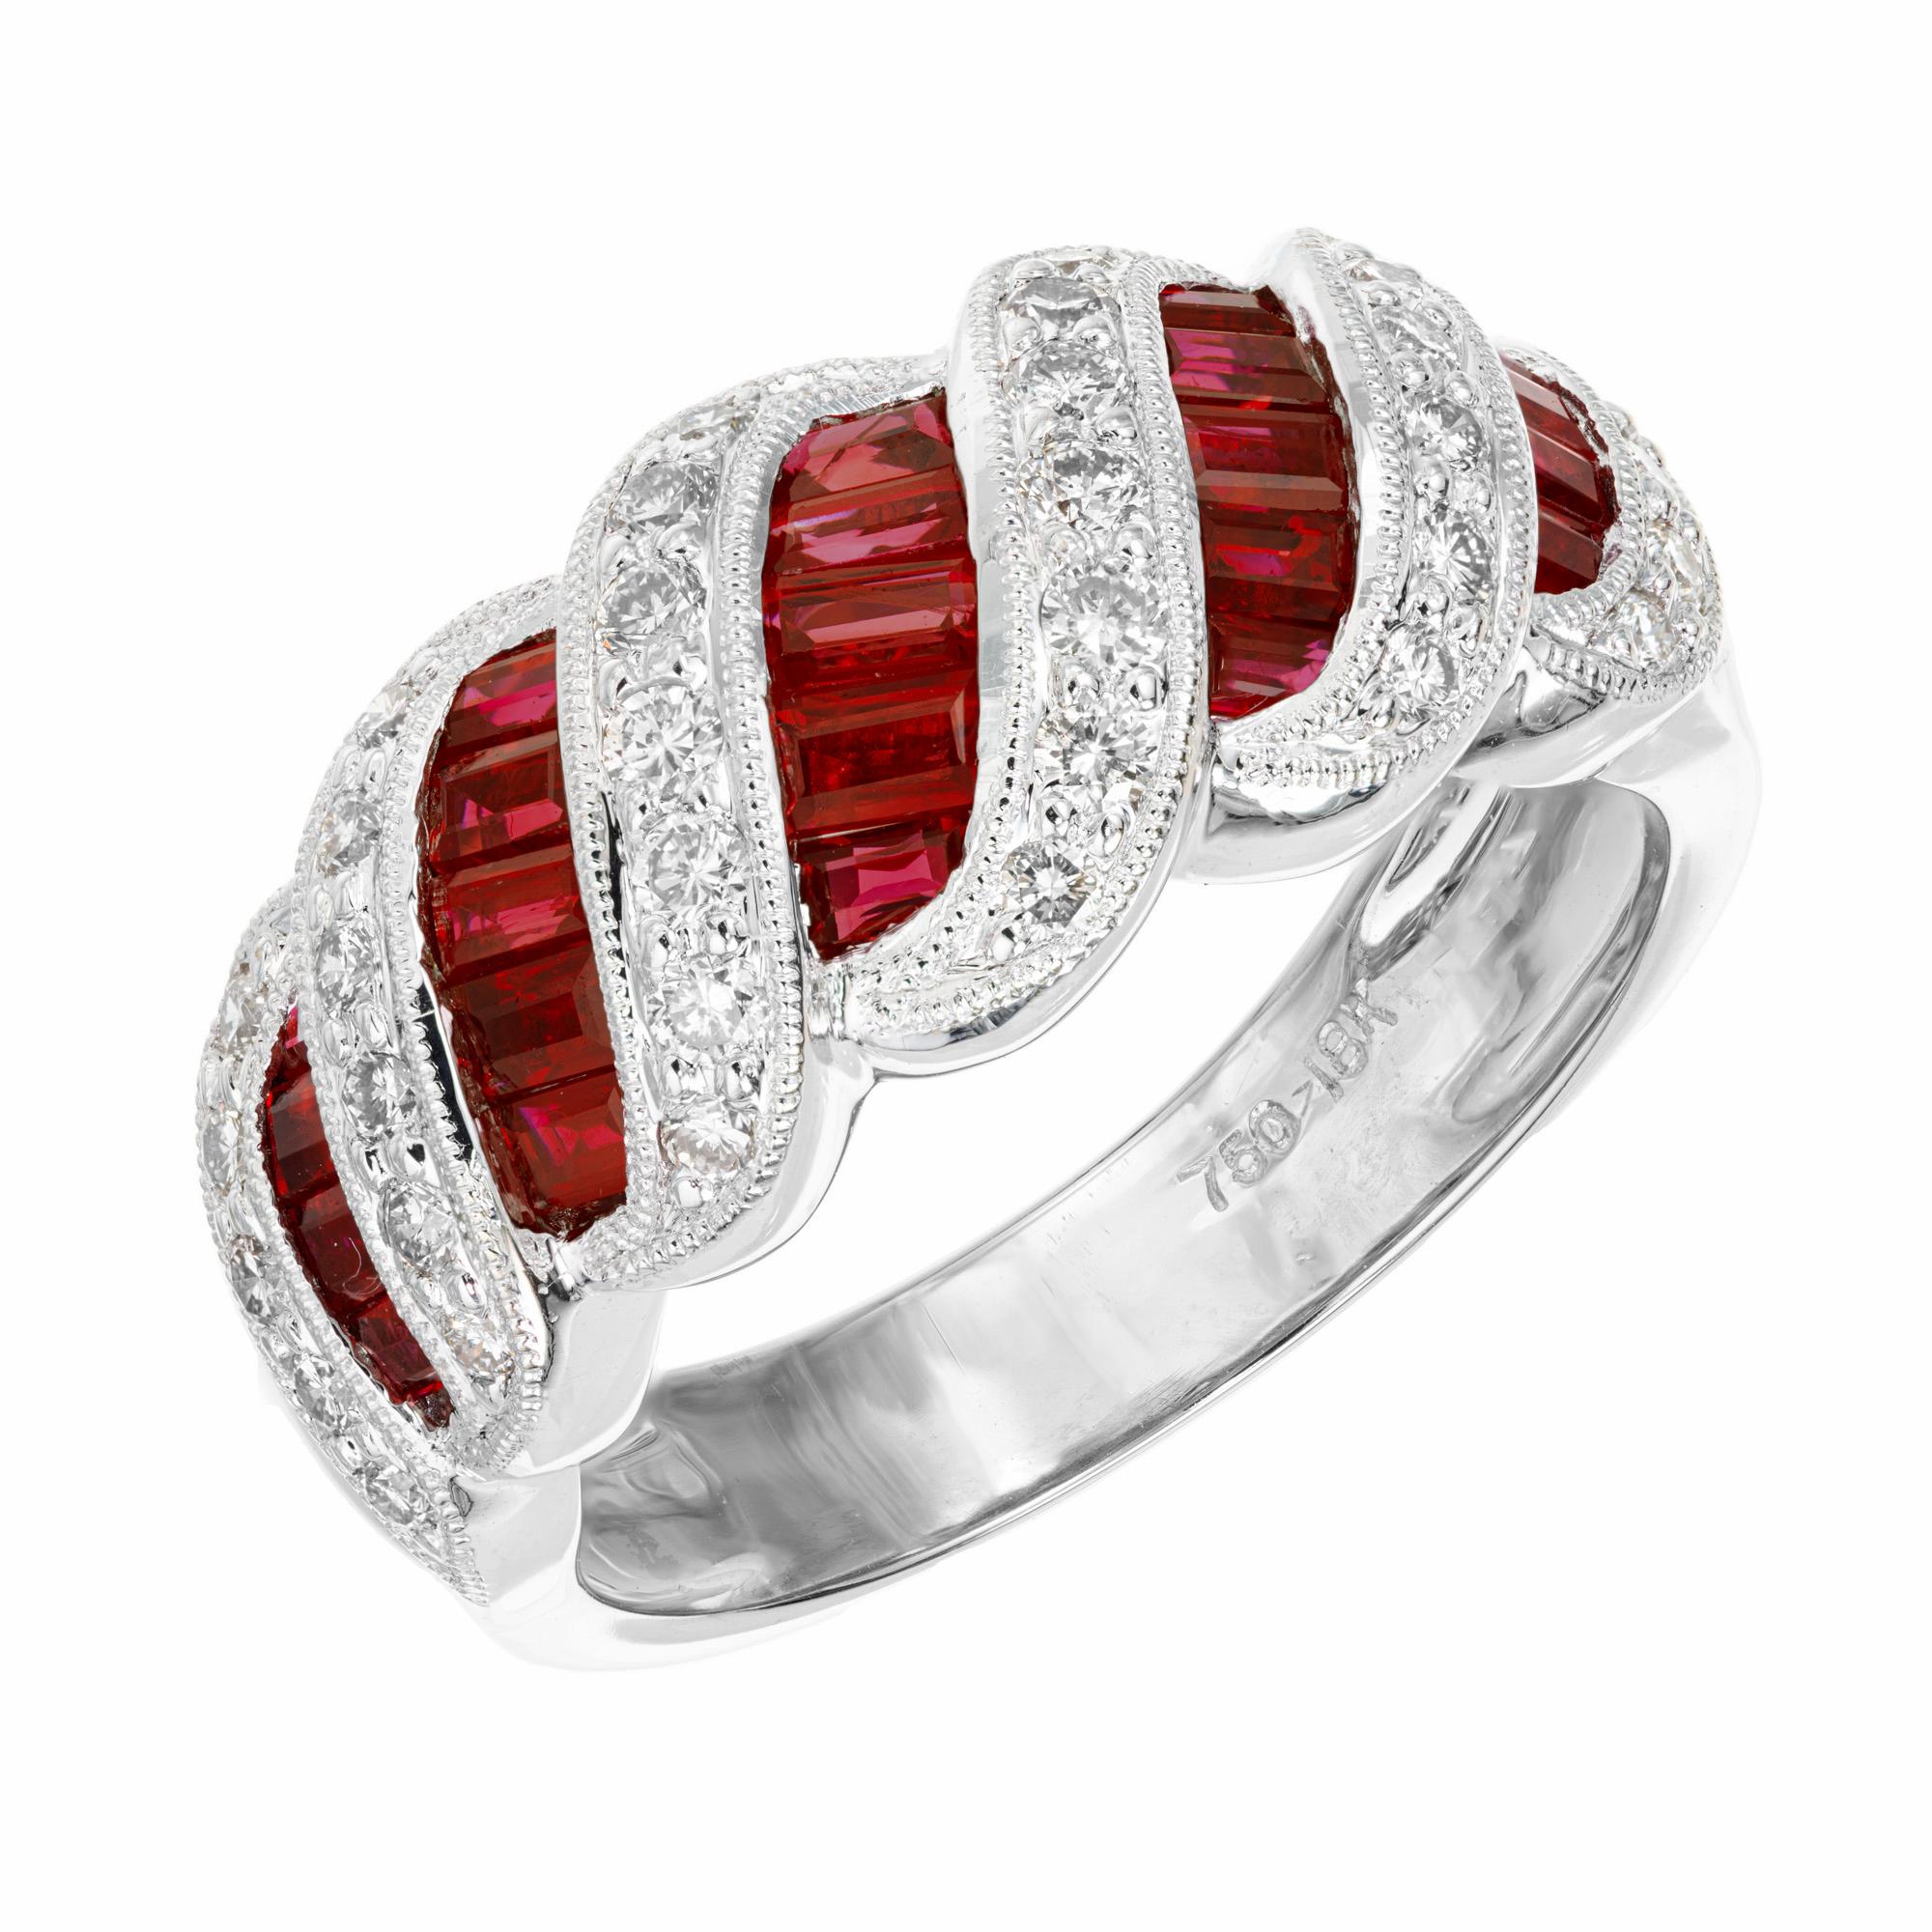 Dome Ruby and diamond band ring. 23 baguette shape rubies approximately totaling 1.46cts separated by 36 round cut diamonds approximately totaling .36cts set in 18k white gold beaded swirls. The rubies are a rich red color complimented by bright